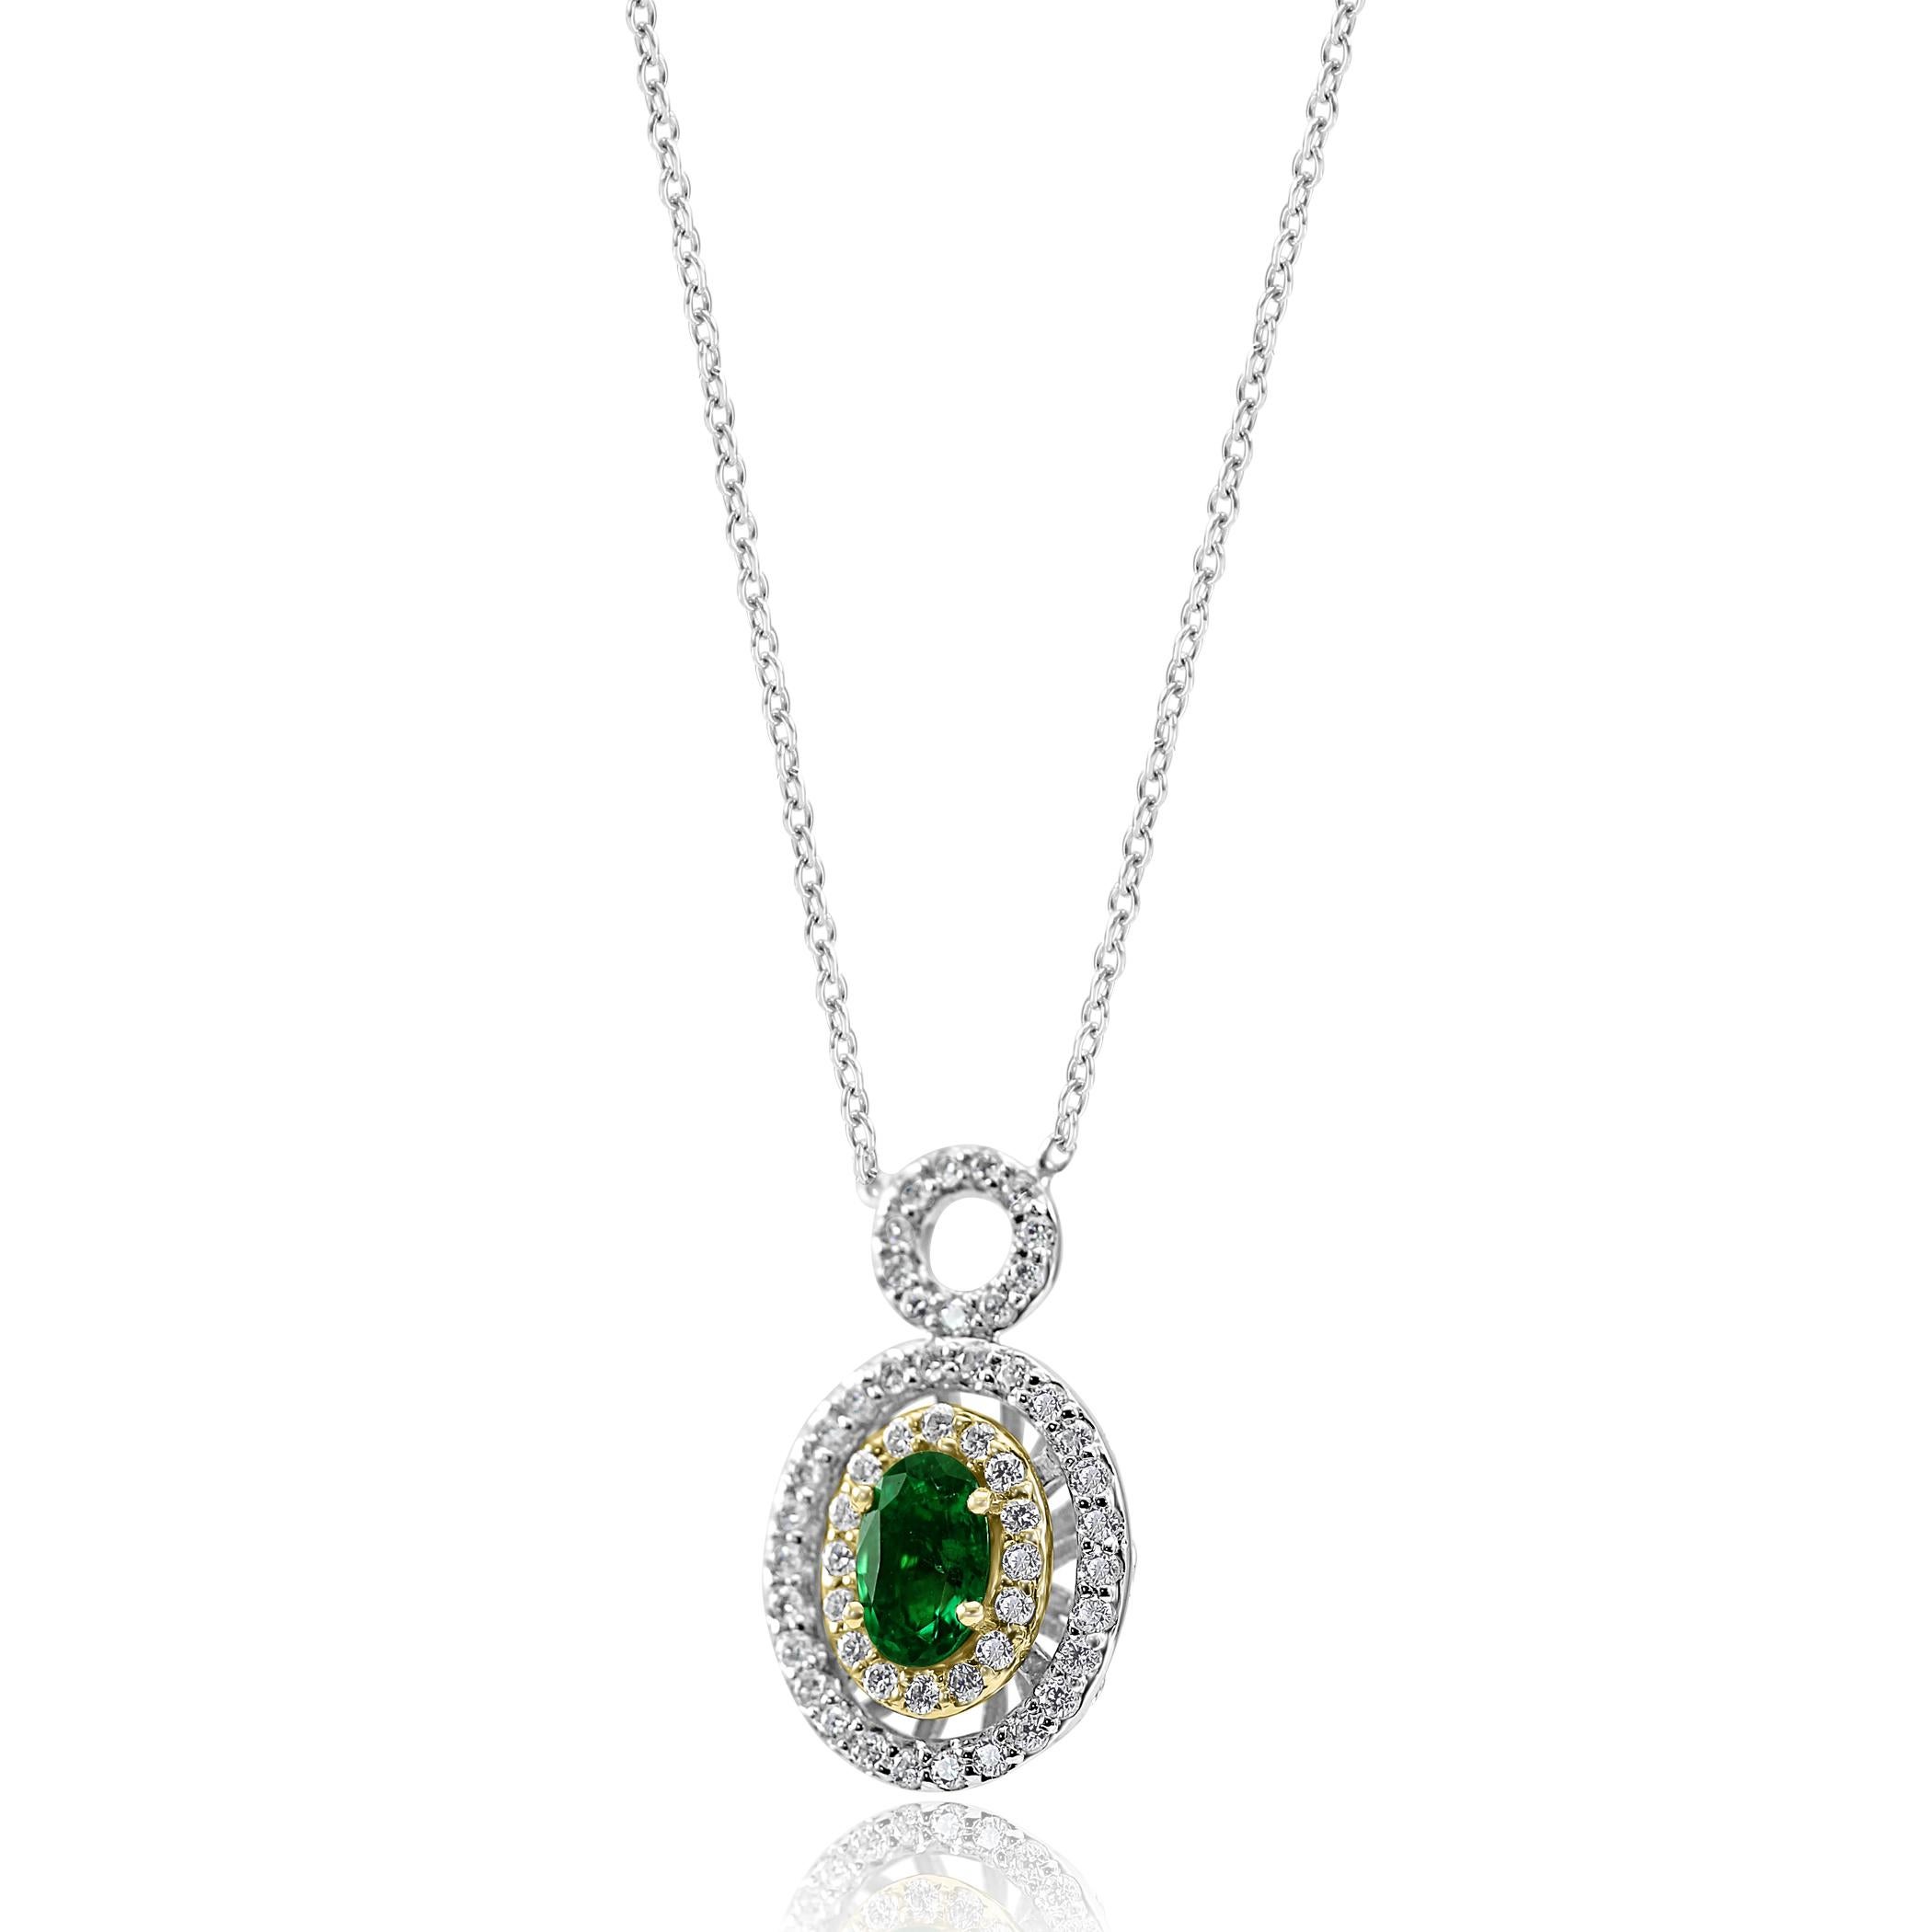 1 Emerald Oval 0.43 Carat Encircled in Double Halo of 59 White G-H Color VS-SI clarity Diamond Rounds 0.52 carat set in stunning 14K White and Yellow Gold Pendant Diamond By Yard Chain Necklace .

Total Stone Weight 0.95 Carat

Style available in